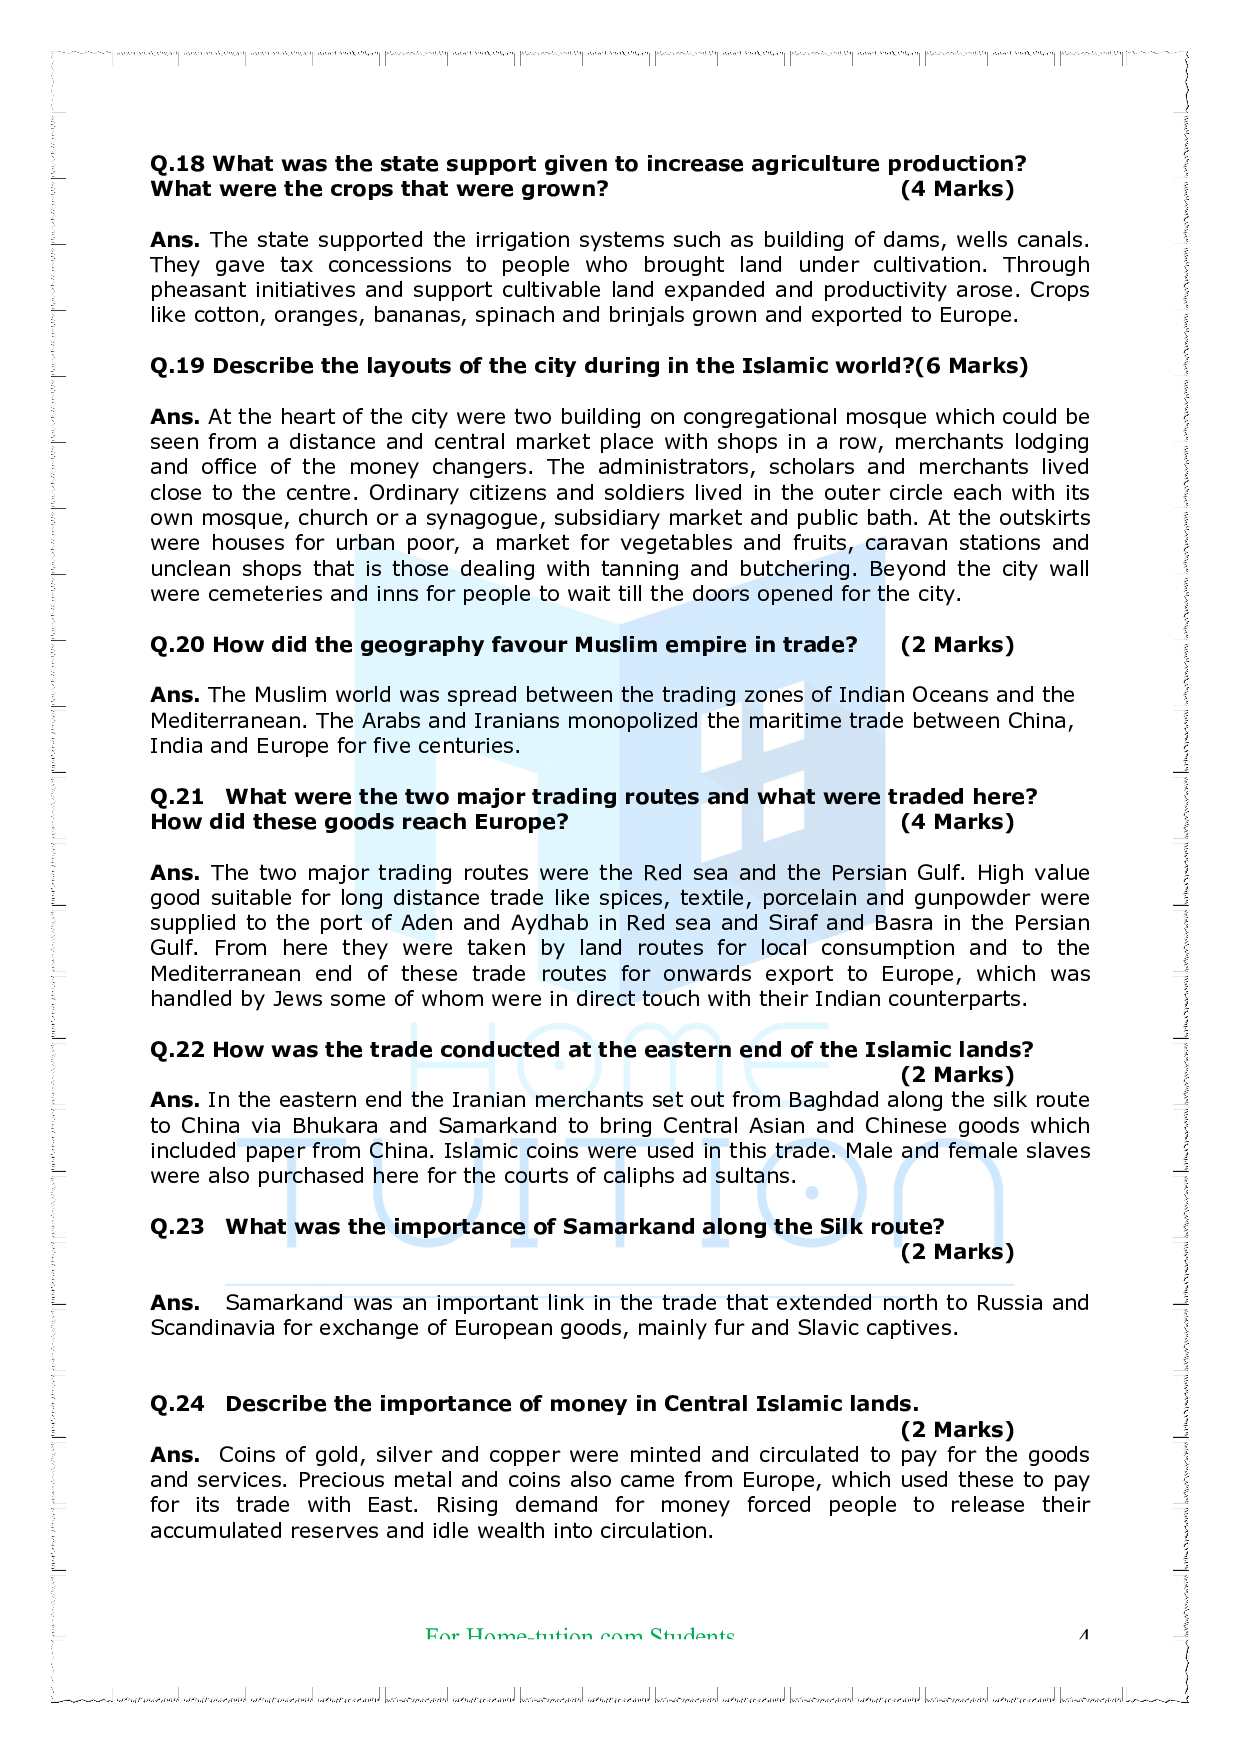 Chapter-4 The Central Islamic Lands Questions